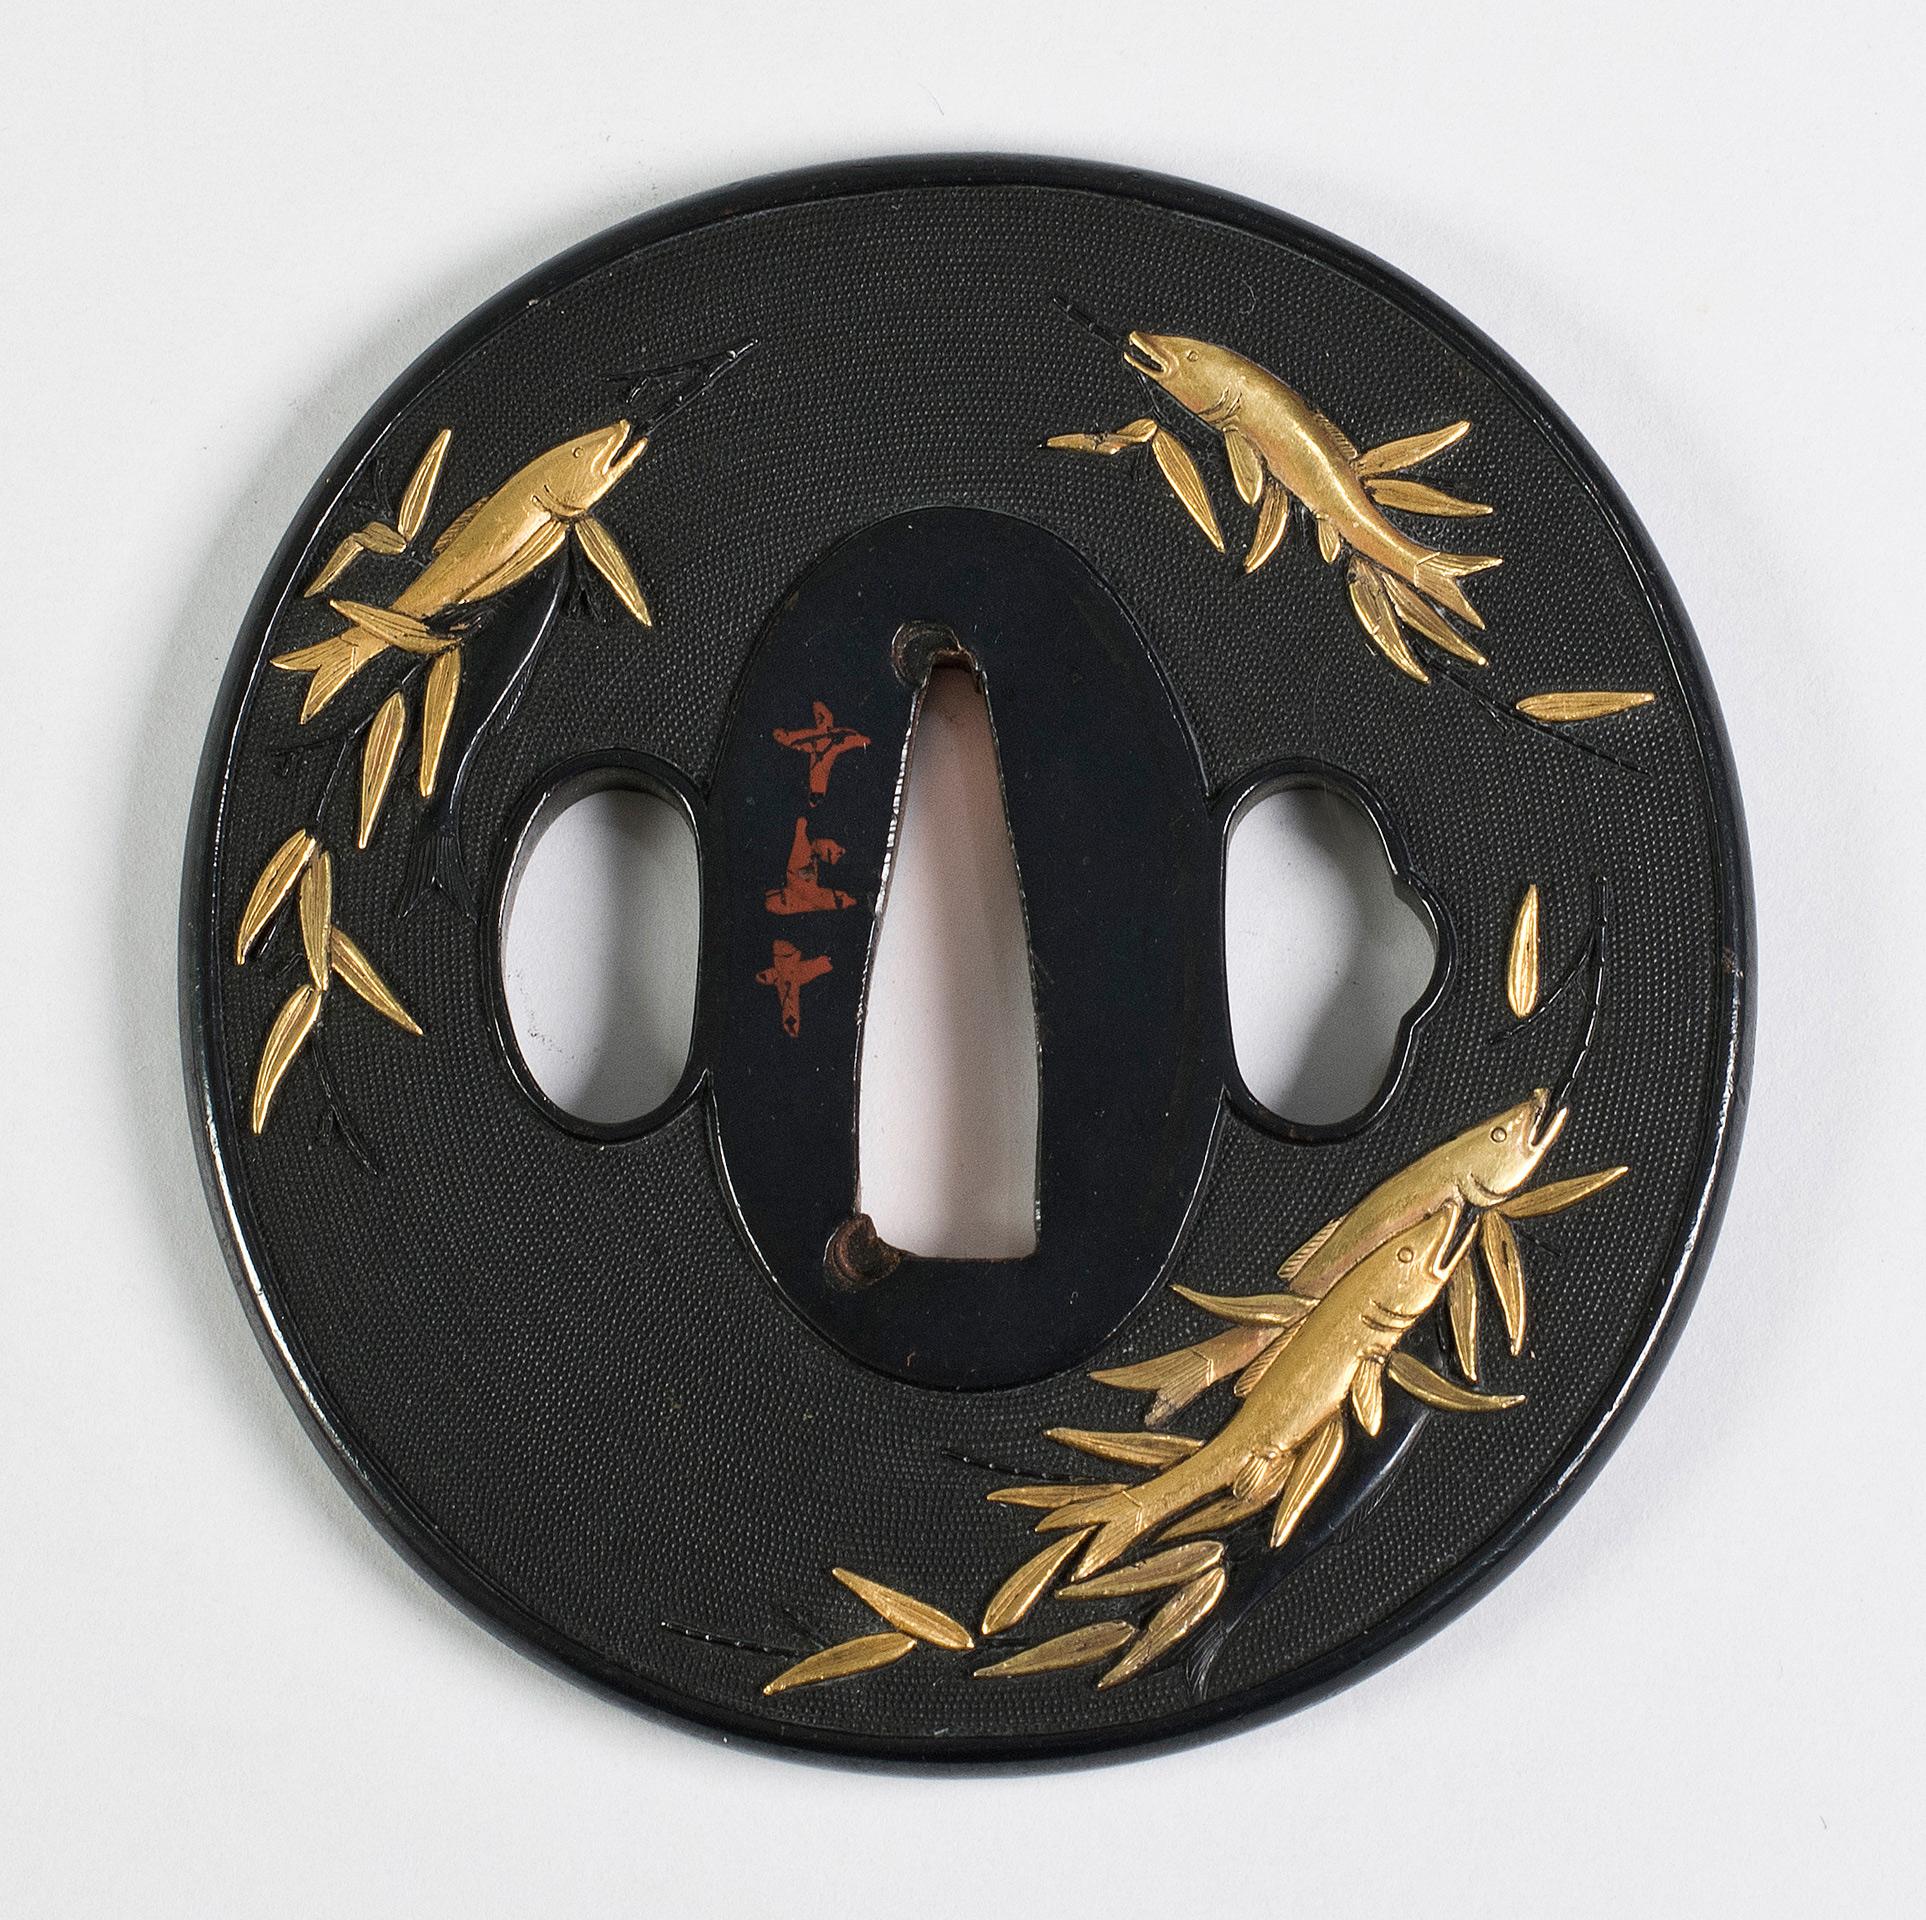 As part of our Japanese works of art collection we are delighted to offer this exceptional quality Edo/ Meiji period shakudo tsuba of oval from, this striking example finely detailed in nanako ground depicts a school of fish upon bamboo, a most